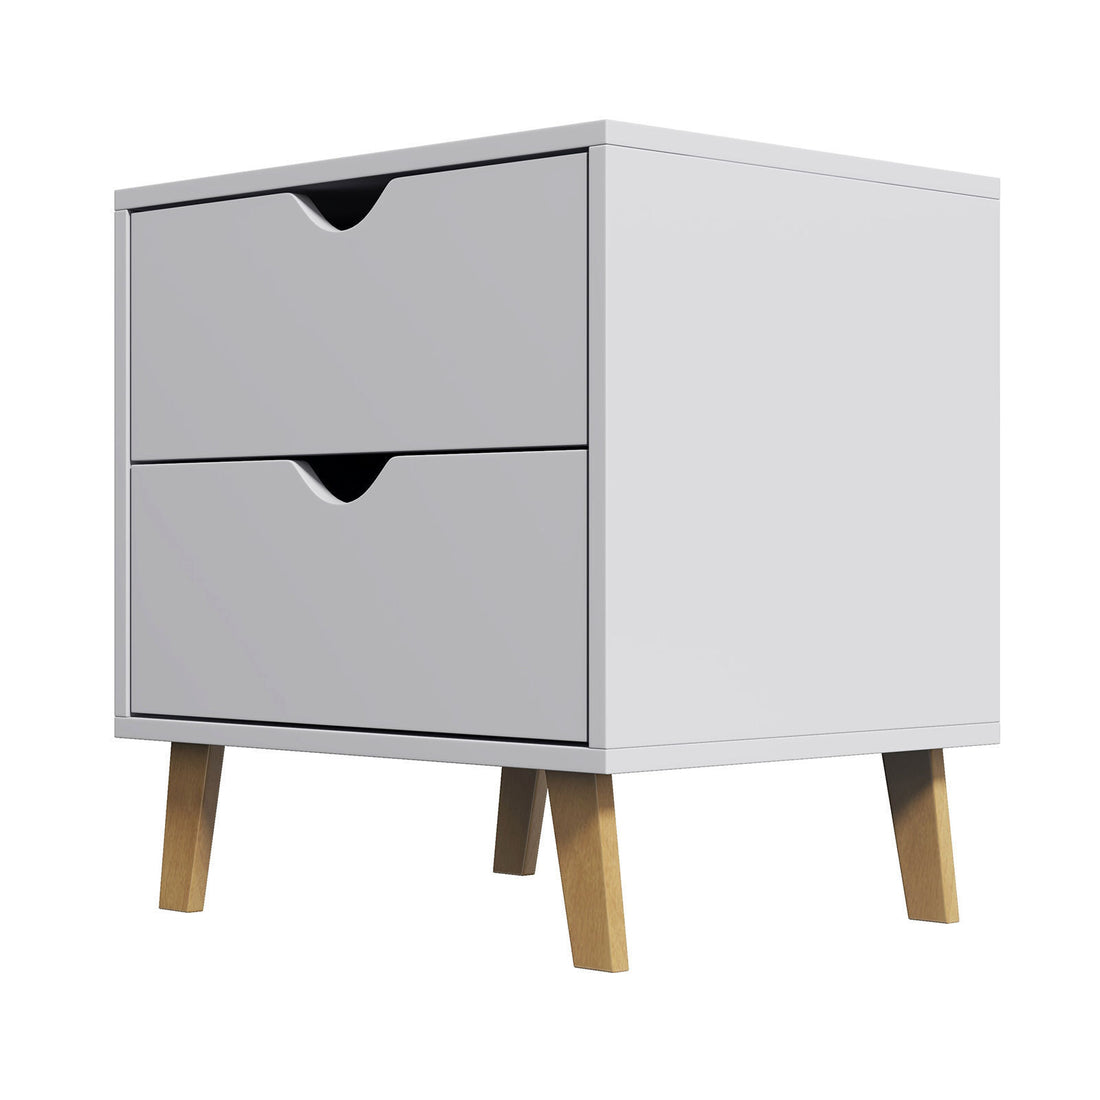 Milano Decor Bedside Table Turramurra Drawers Nightstand Unit Cabinet Storage-Bedside Tables-PEROZ Accessories